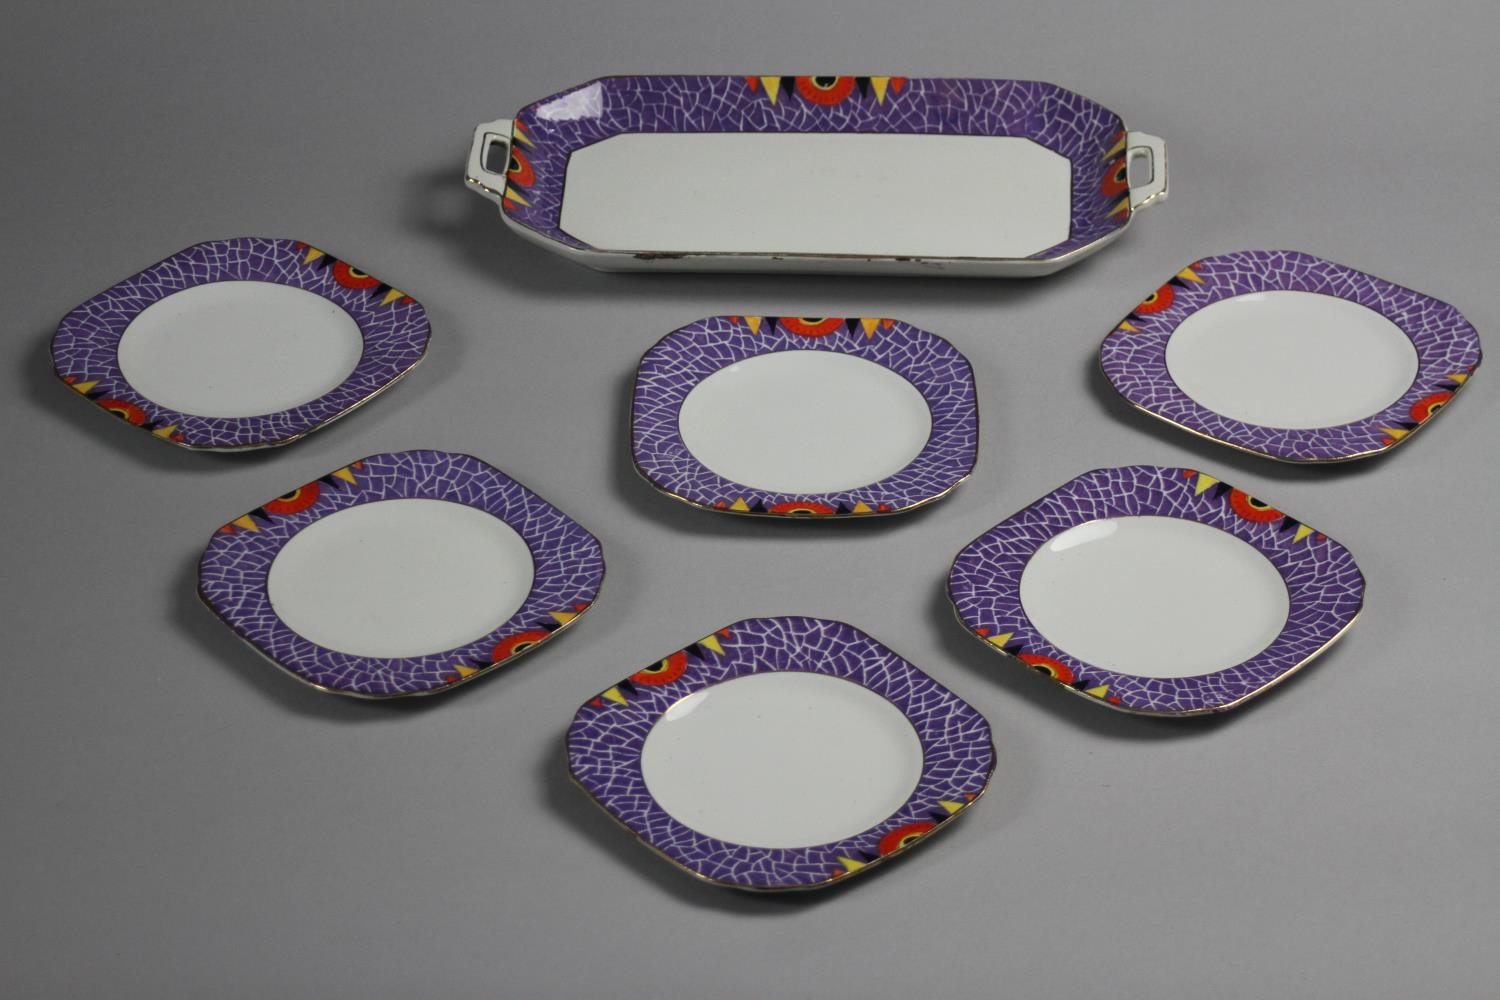 A Barkers & Kent ceramic hand painted geometric design six person cake set with octagonal cake - Image 3 of 9